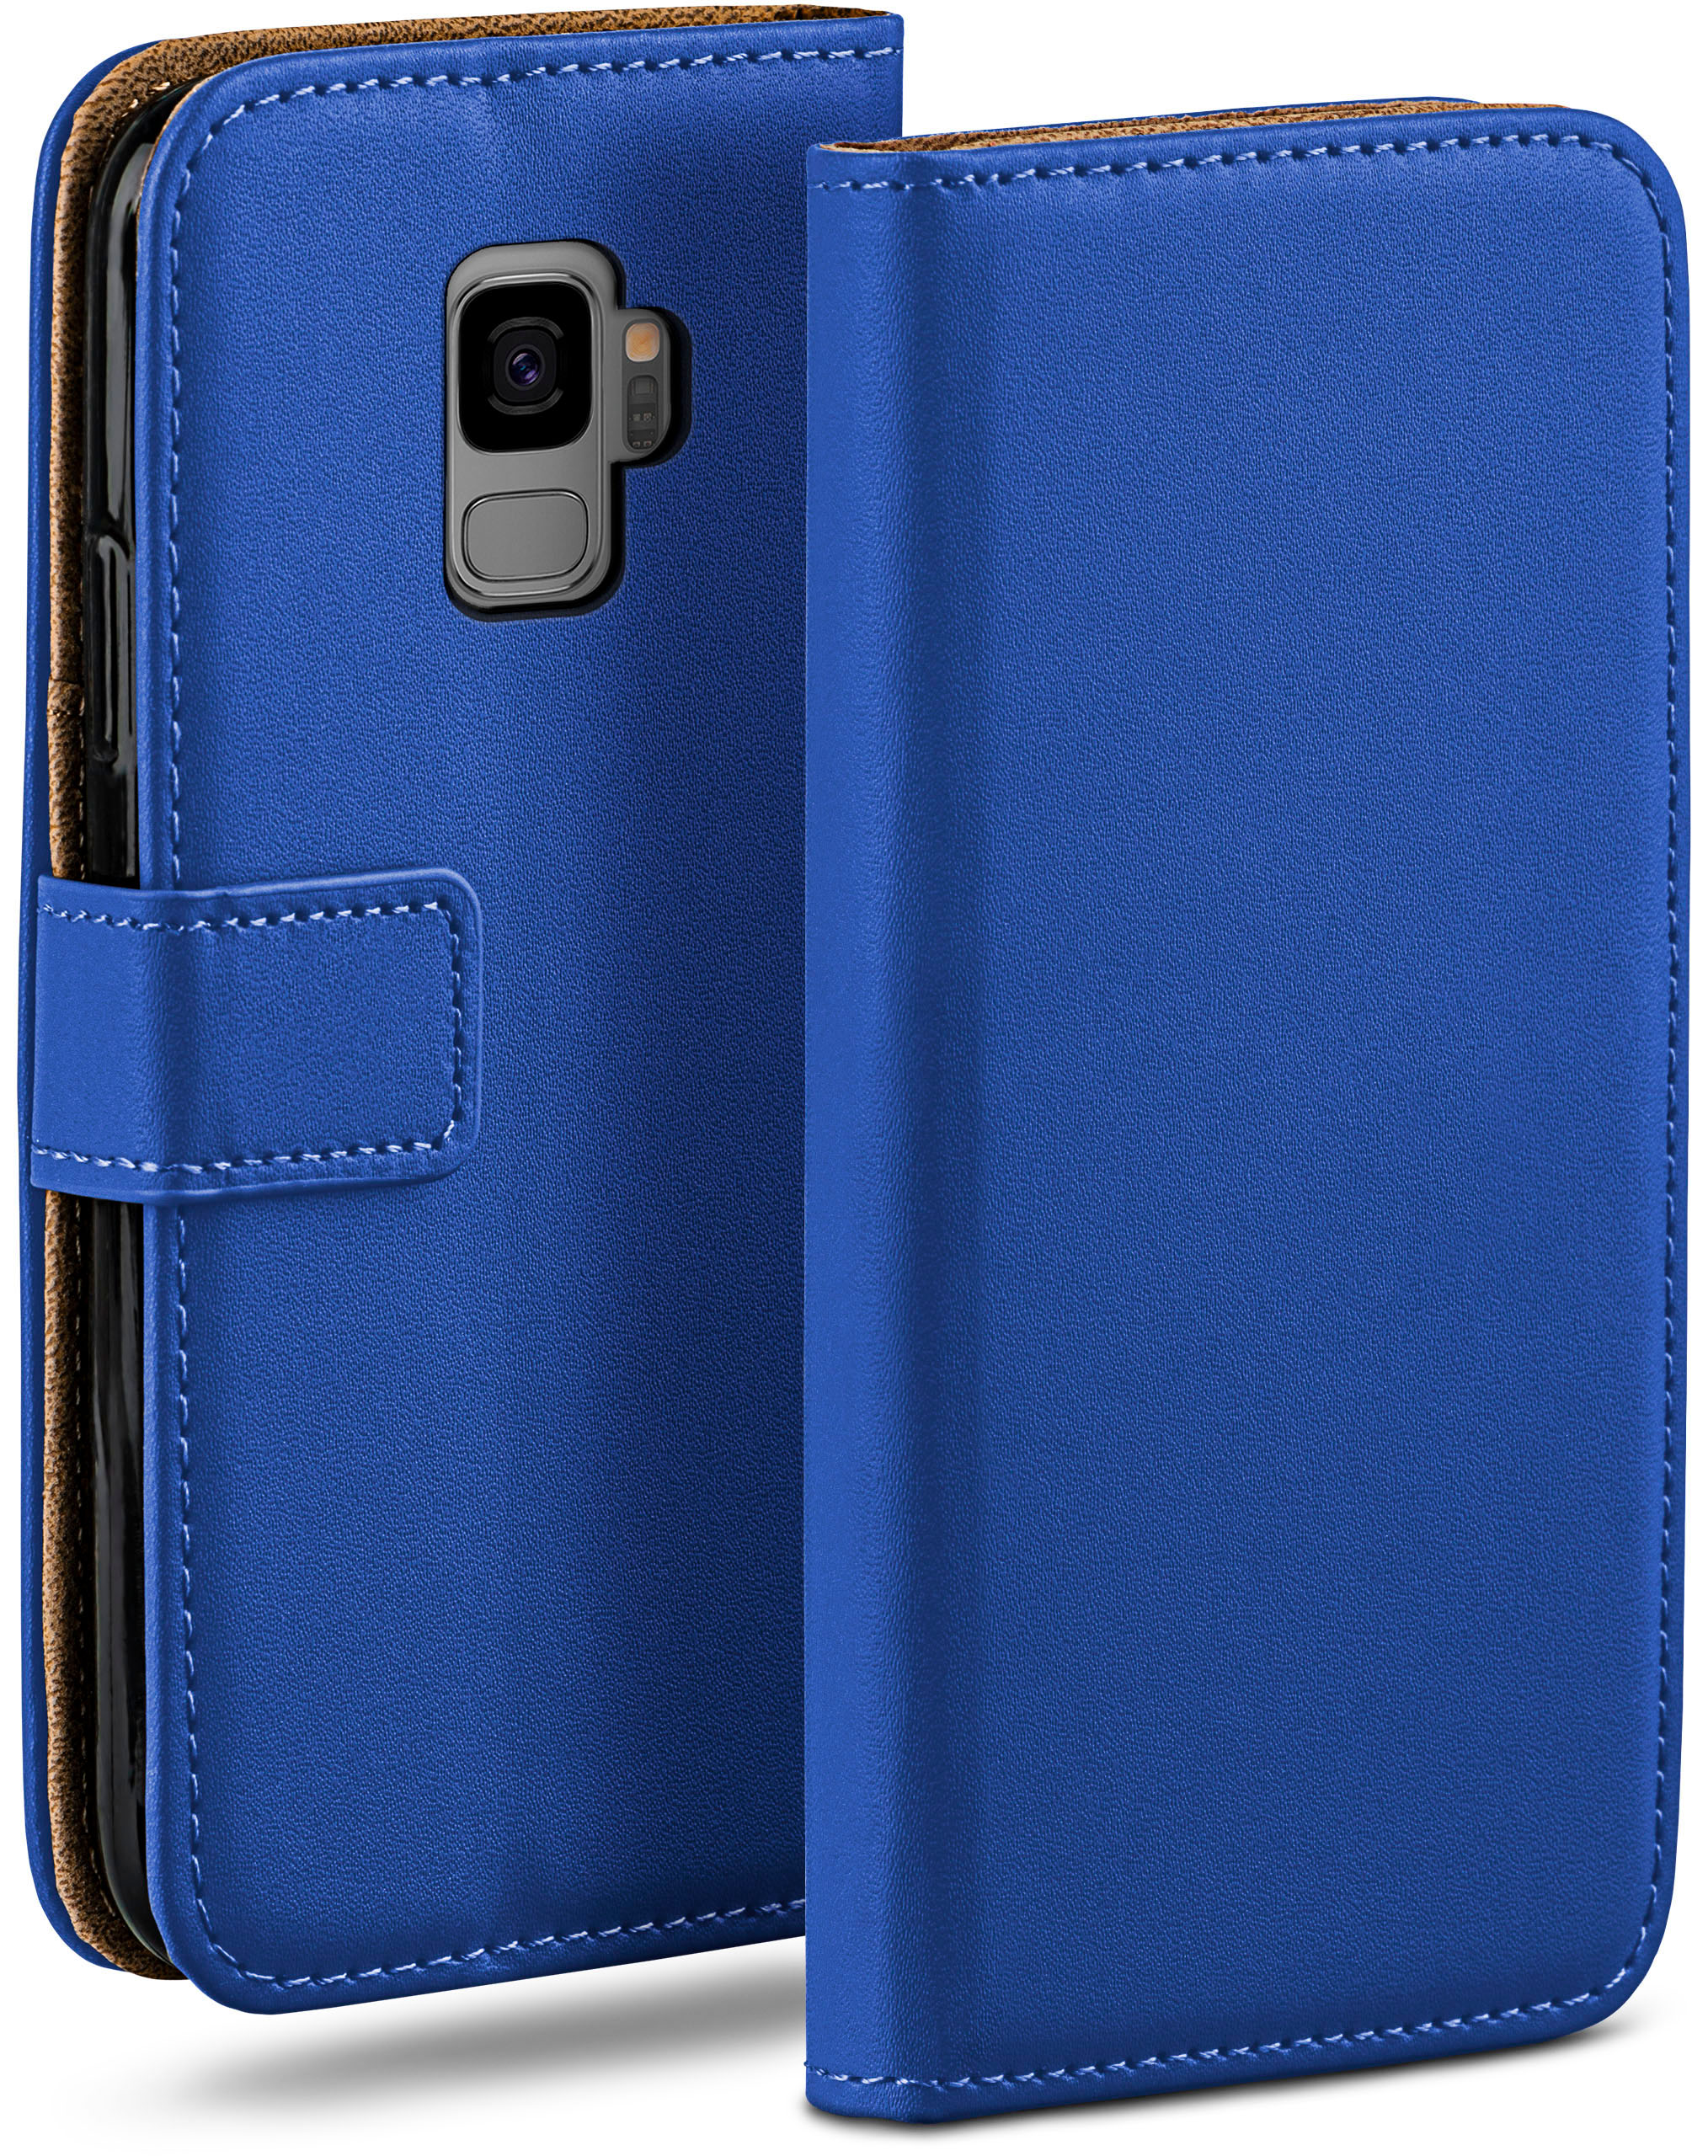 MOEX Book Royal-Blue Case, Galaxy Samsung, Bookcover, S9